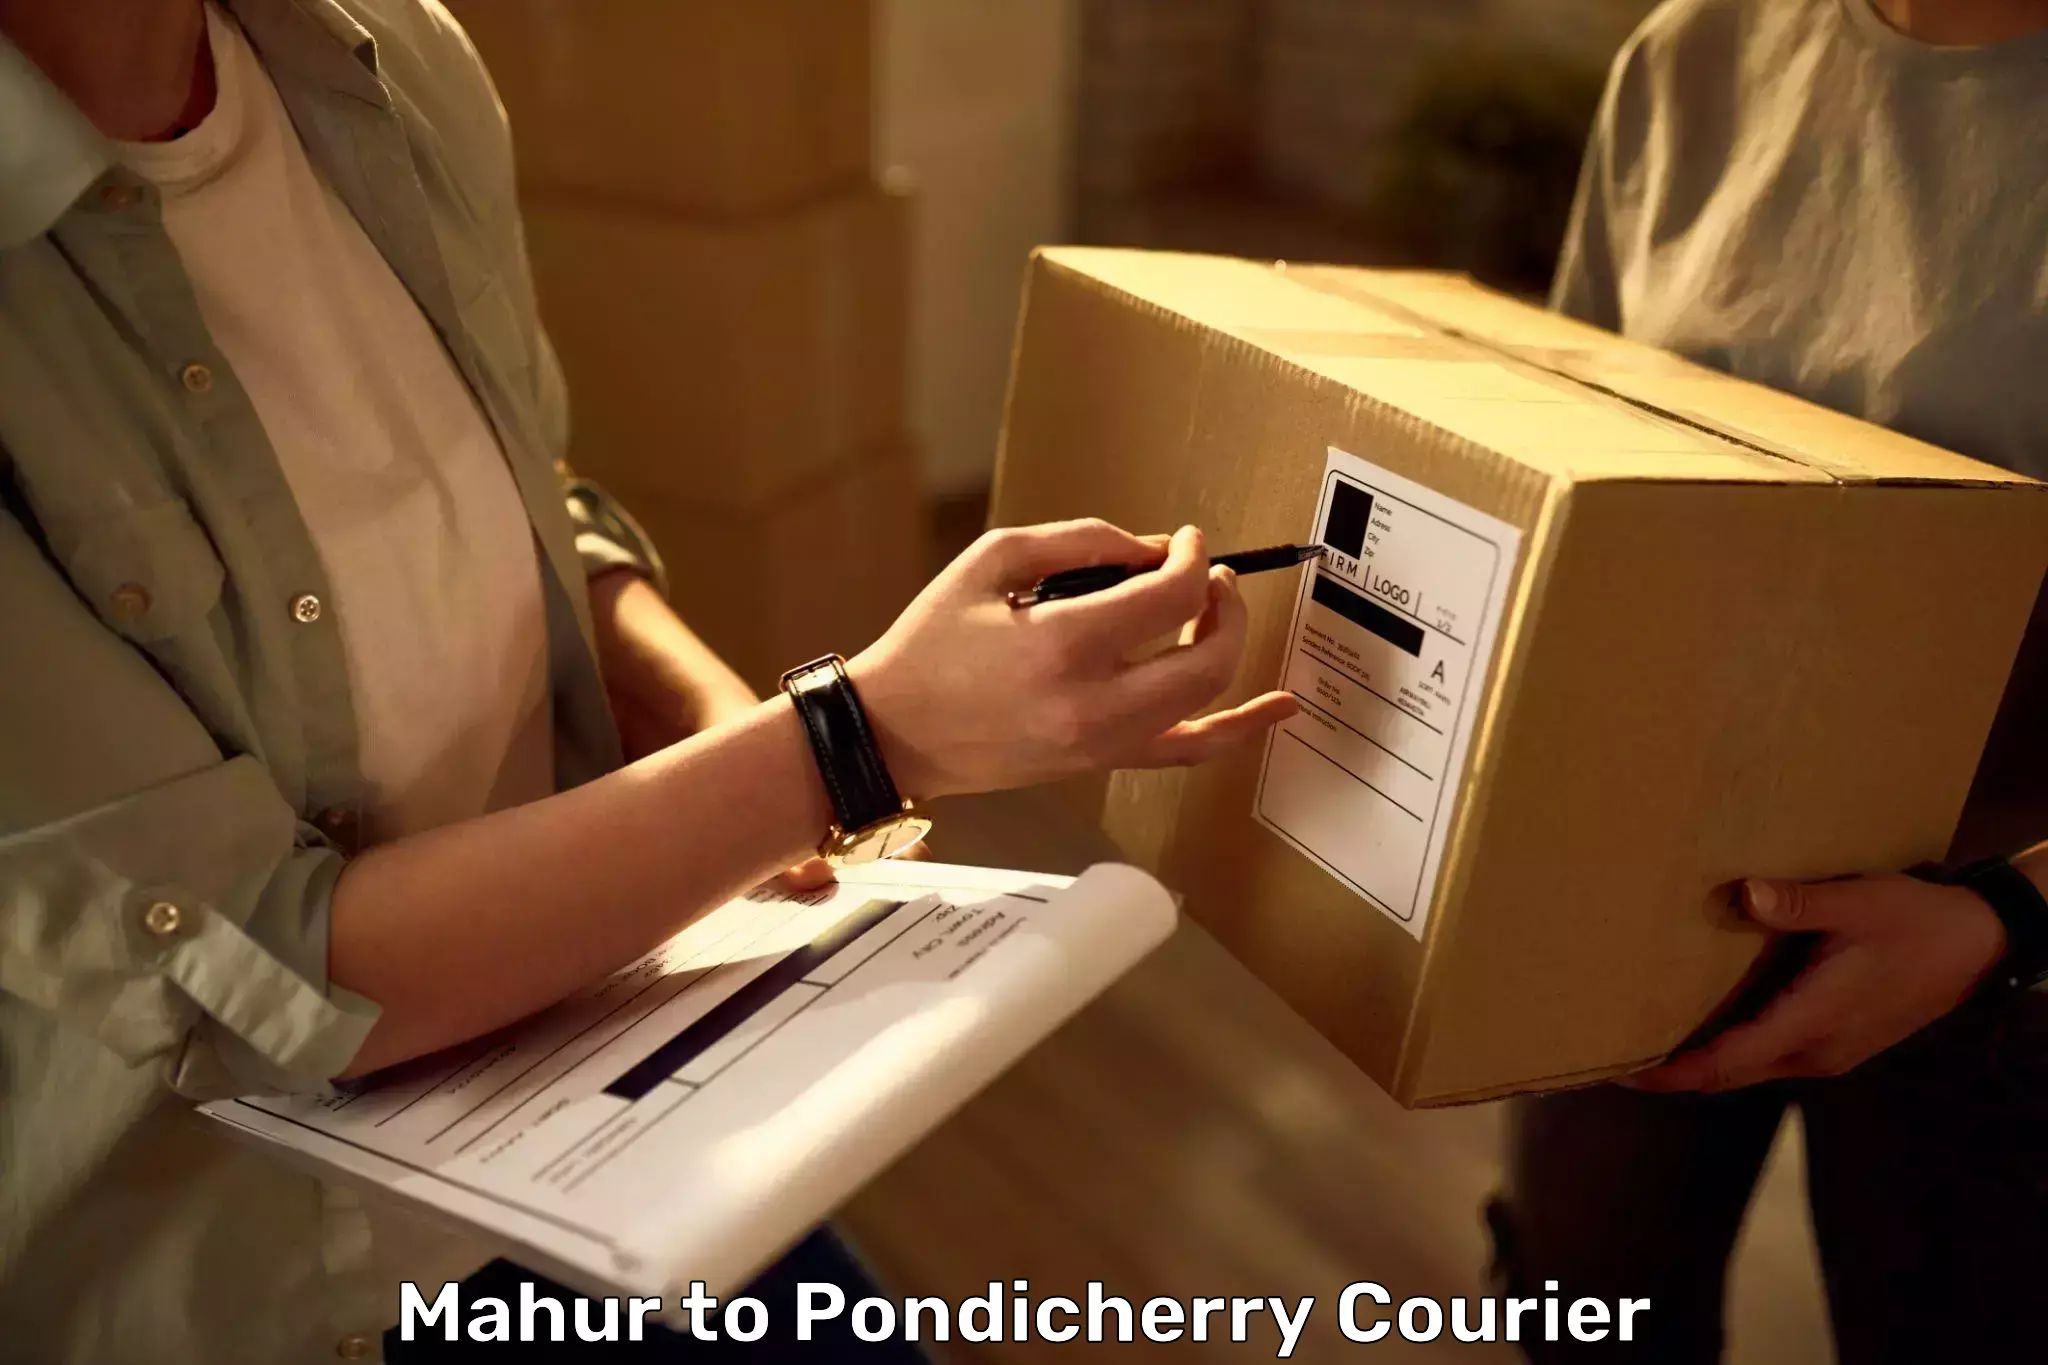 Luggage delivery app Mahur to Pondicherry